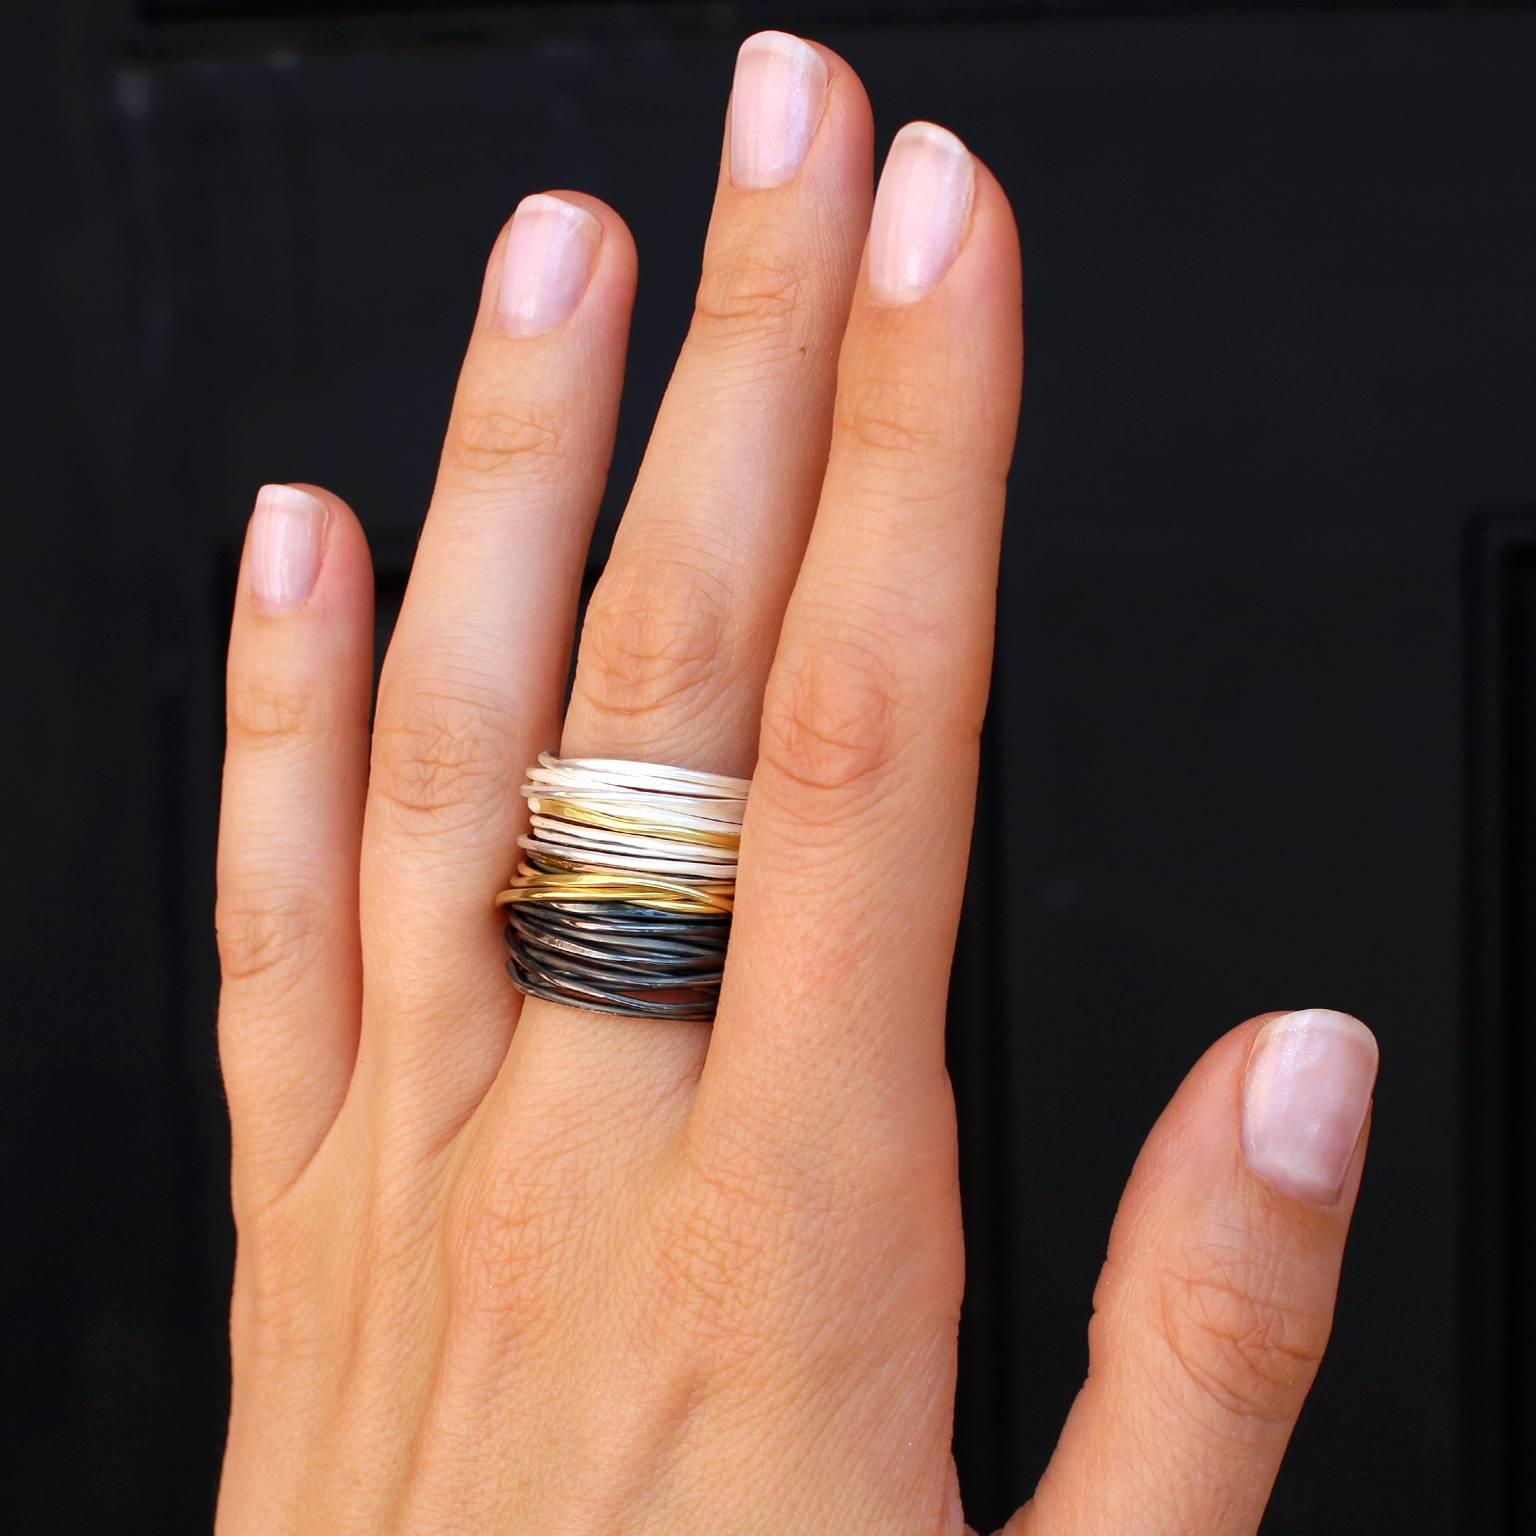 Three Strand Spaghetti Grande Wrap Ring handcrafted by London jewelry artist Disa Allsop in 18k yellow gold, oxidized sterling silver, and bright sterling silver. Size 8 (special order available in other sizes).